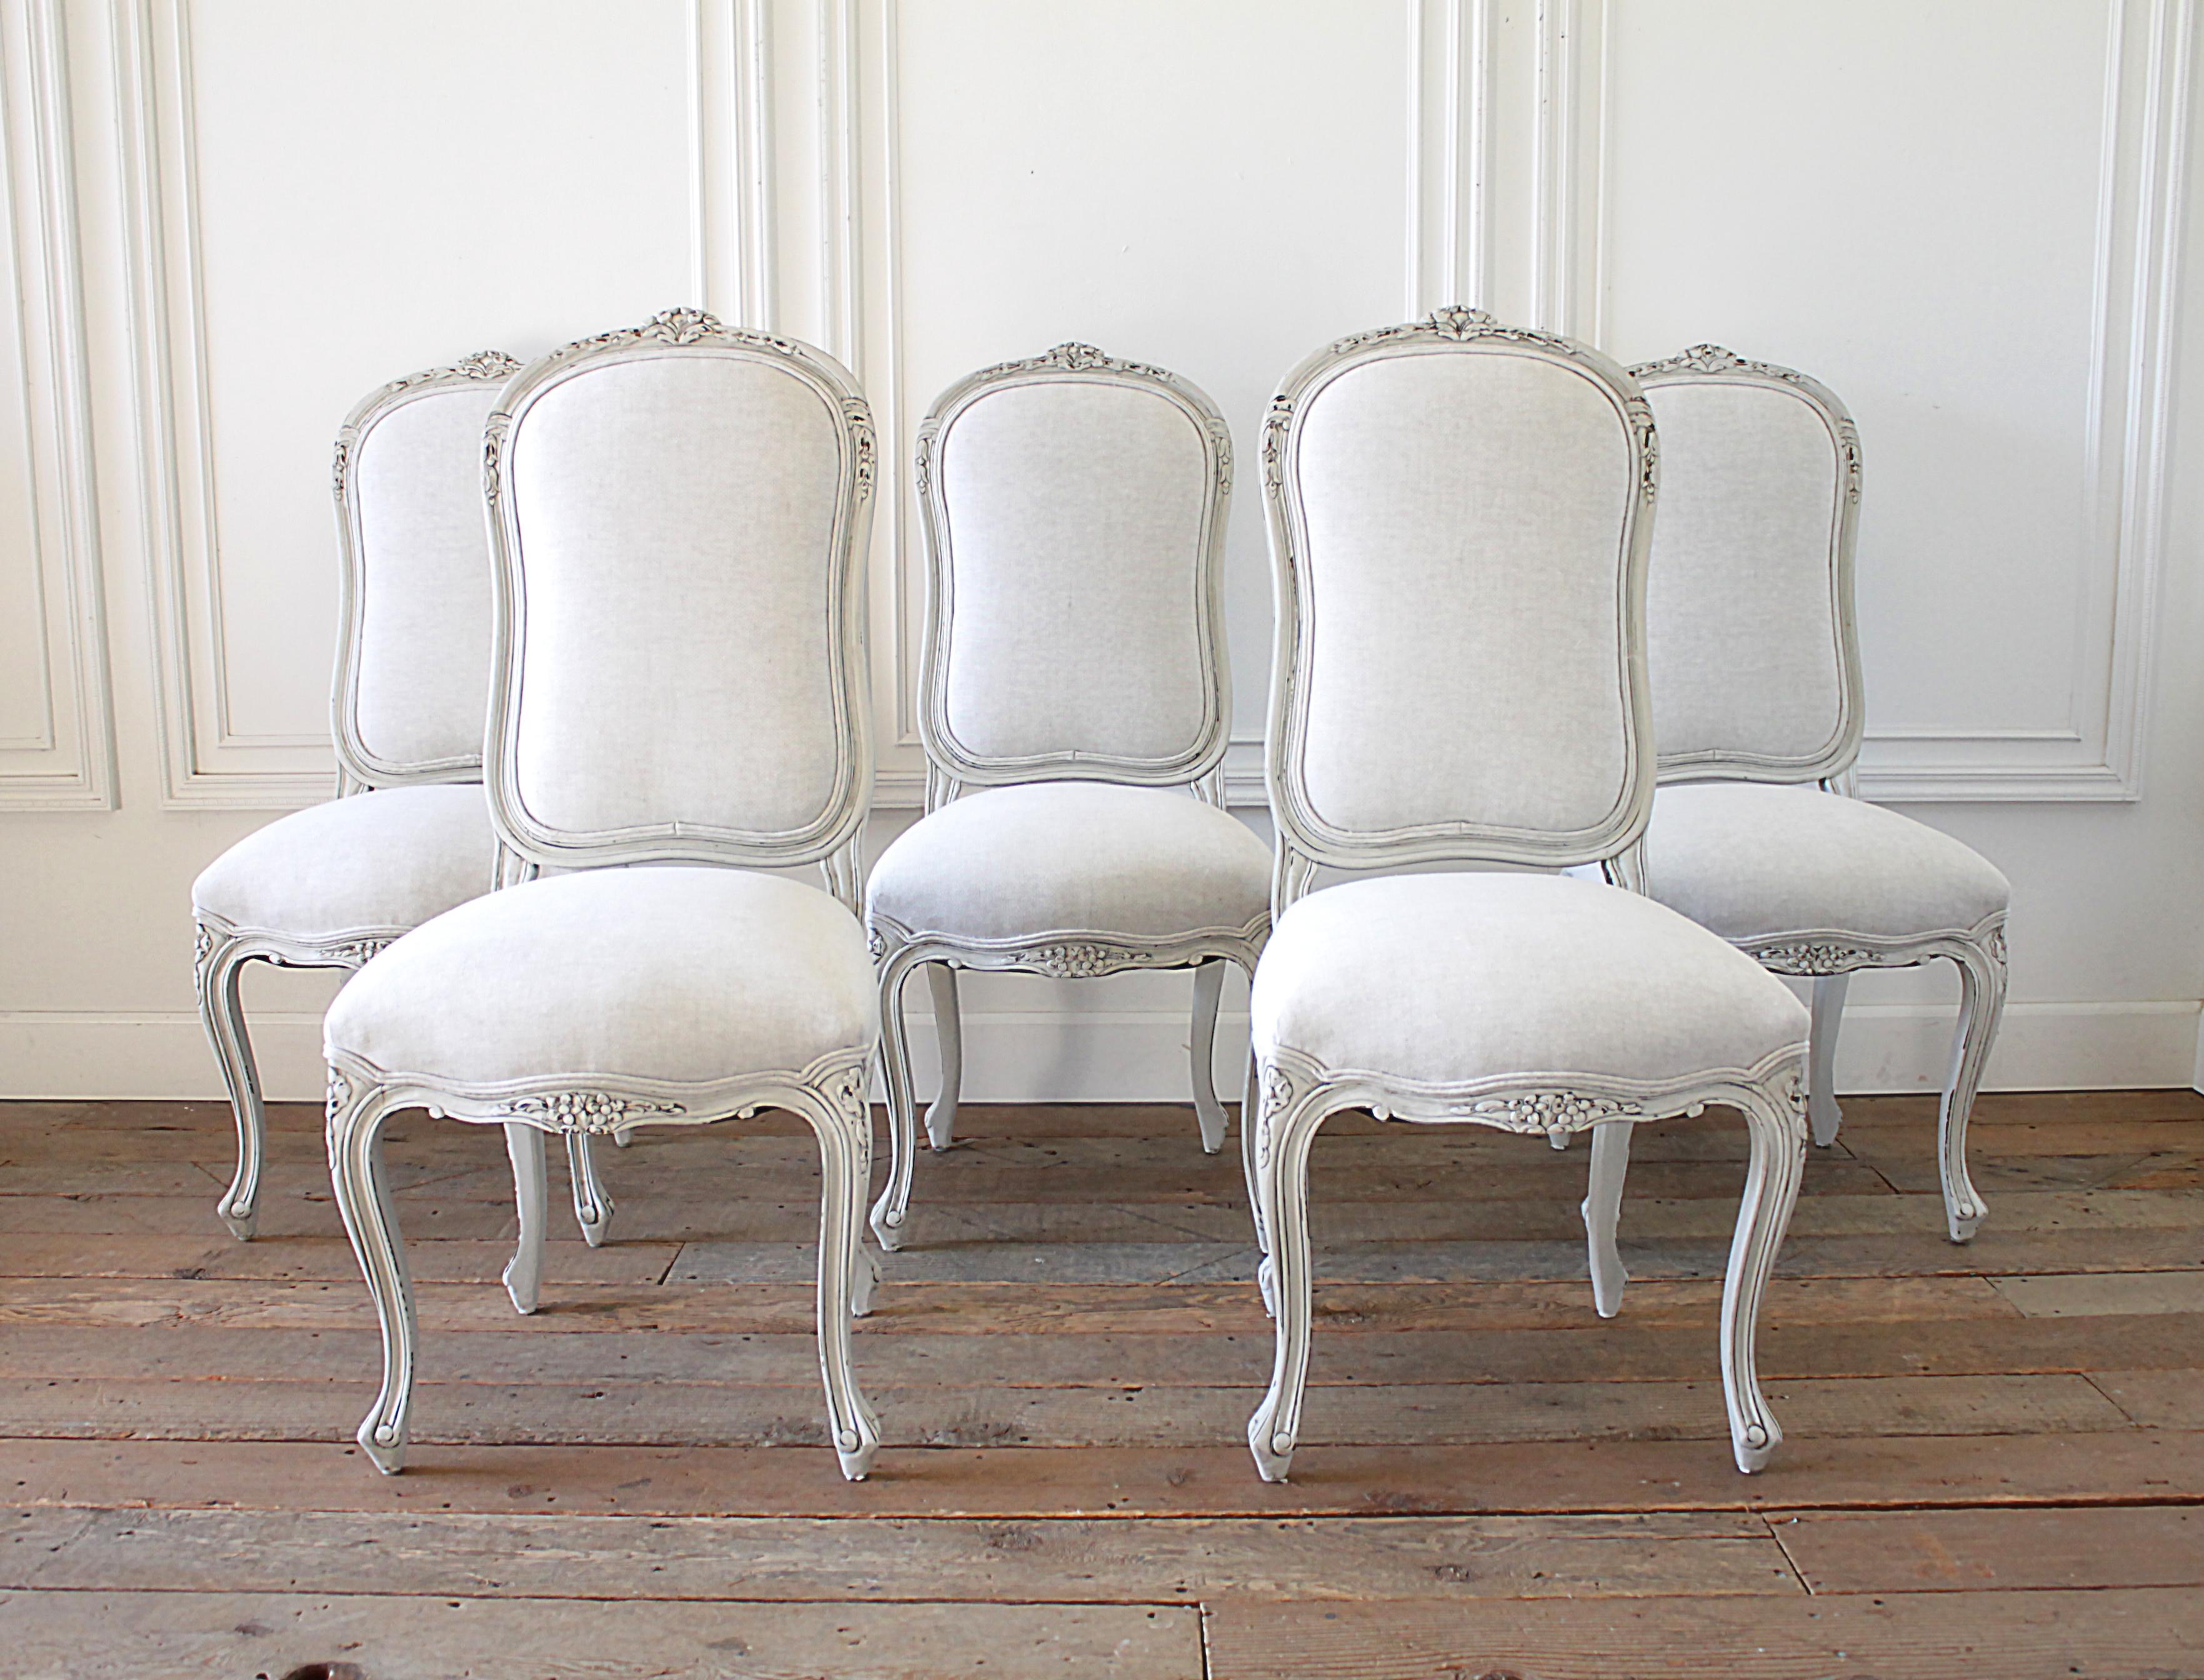 Set of 5 painted and upholstered dining room chairs in Belgian Linen
20th century Louis XV style dining chairs, upholstered in natural linen, with double welt trim. Beautiful carved flowers at the top and front seat with curved cabriole legs.
Very